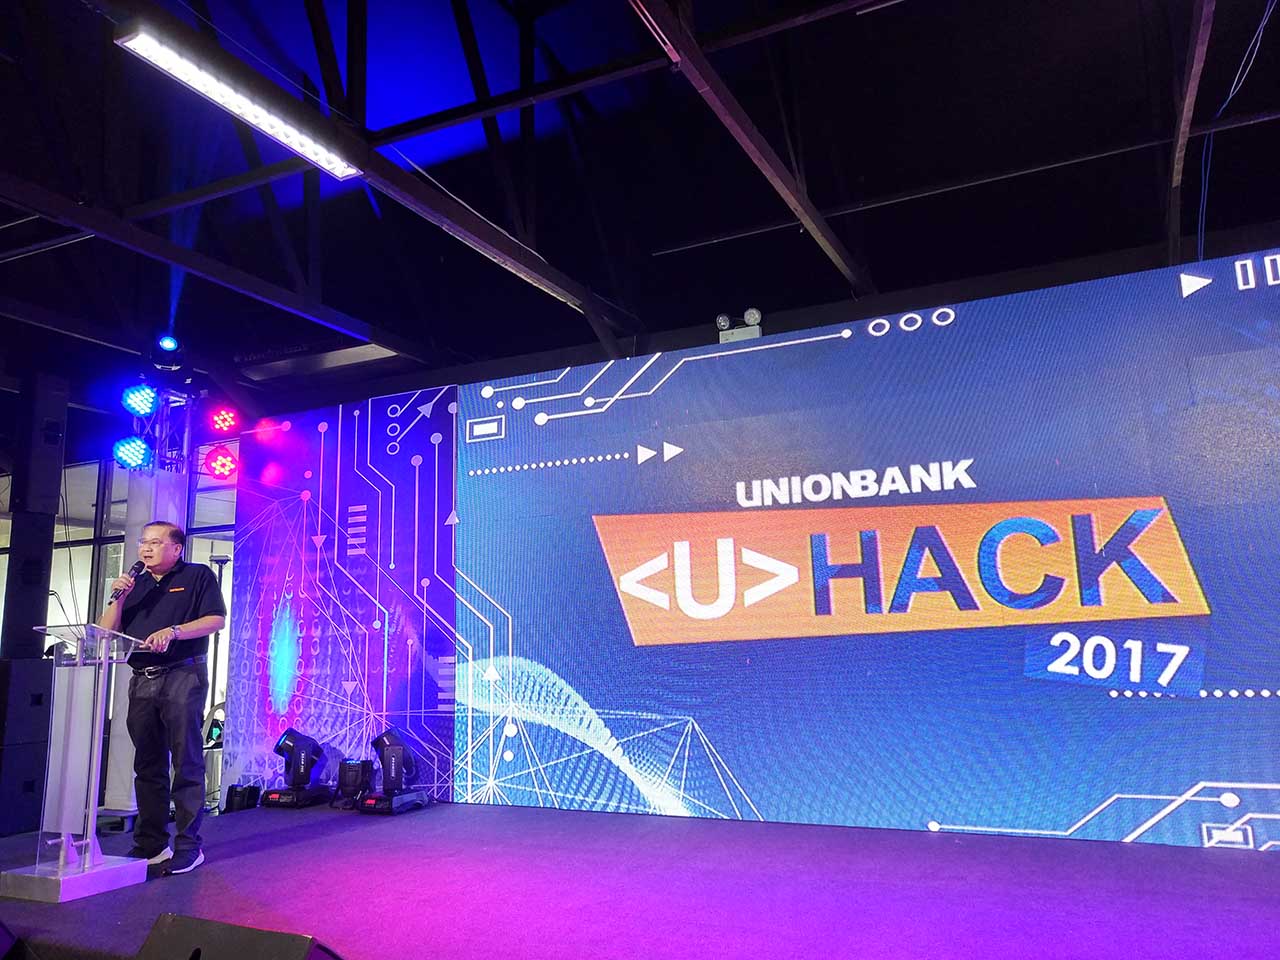 Unionbank Sets Out To Hack Ph Banking With Digital Transformation